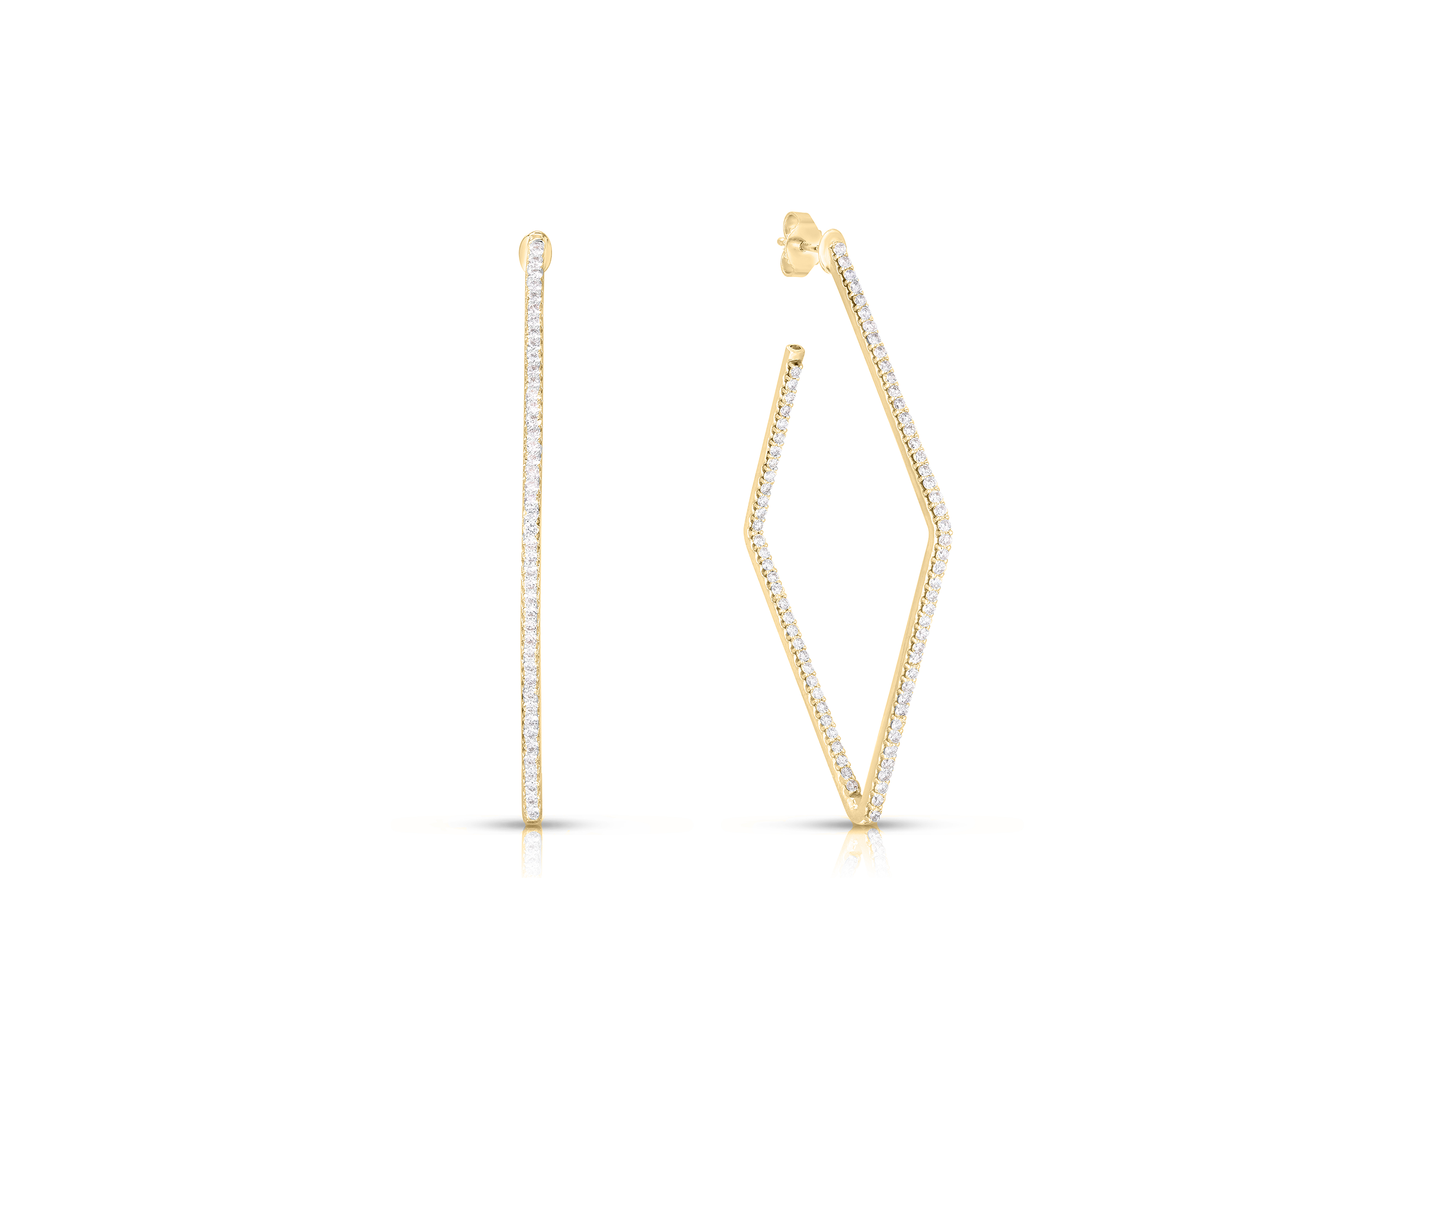 Roberto Coin 18K Yellow Gold Square Hoop Earrings